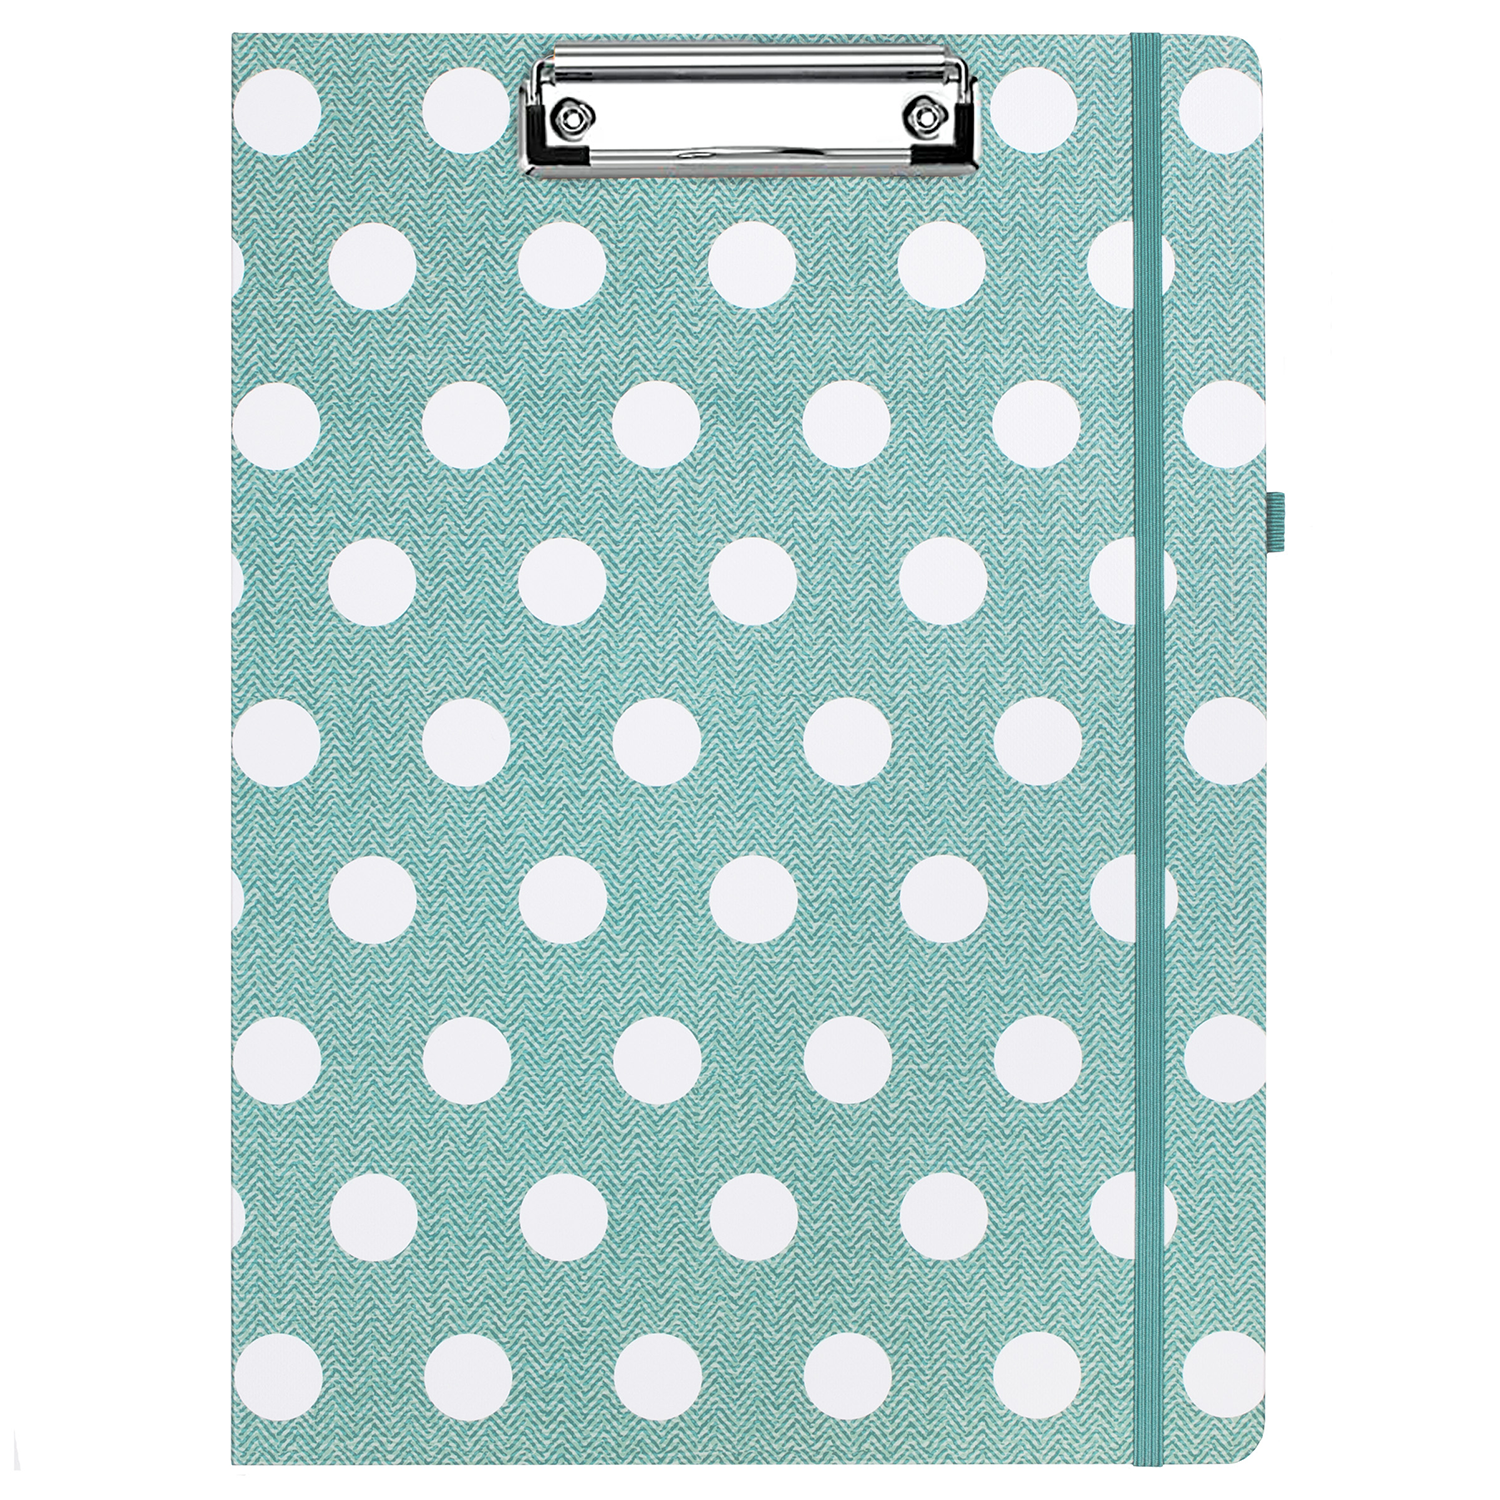 cute clipboard folio with teal hardcover with large white polka dots and lined notepad for professional use 